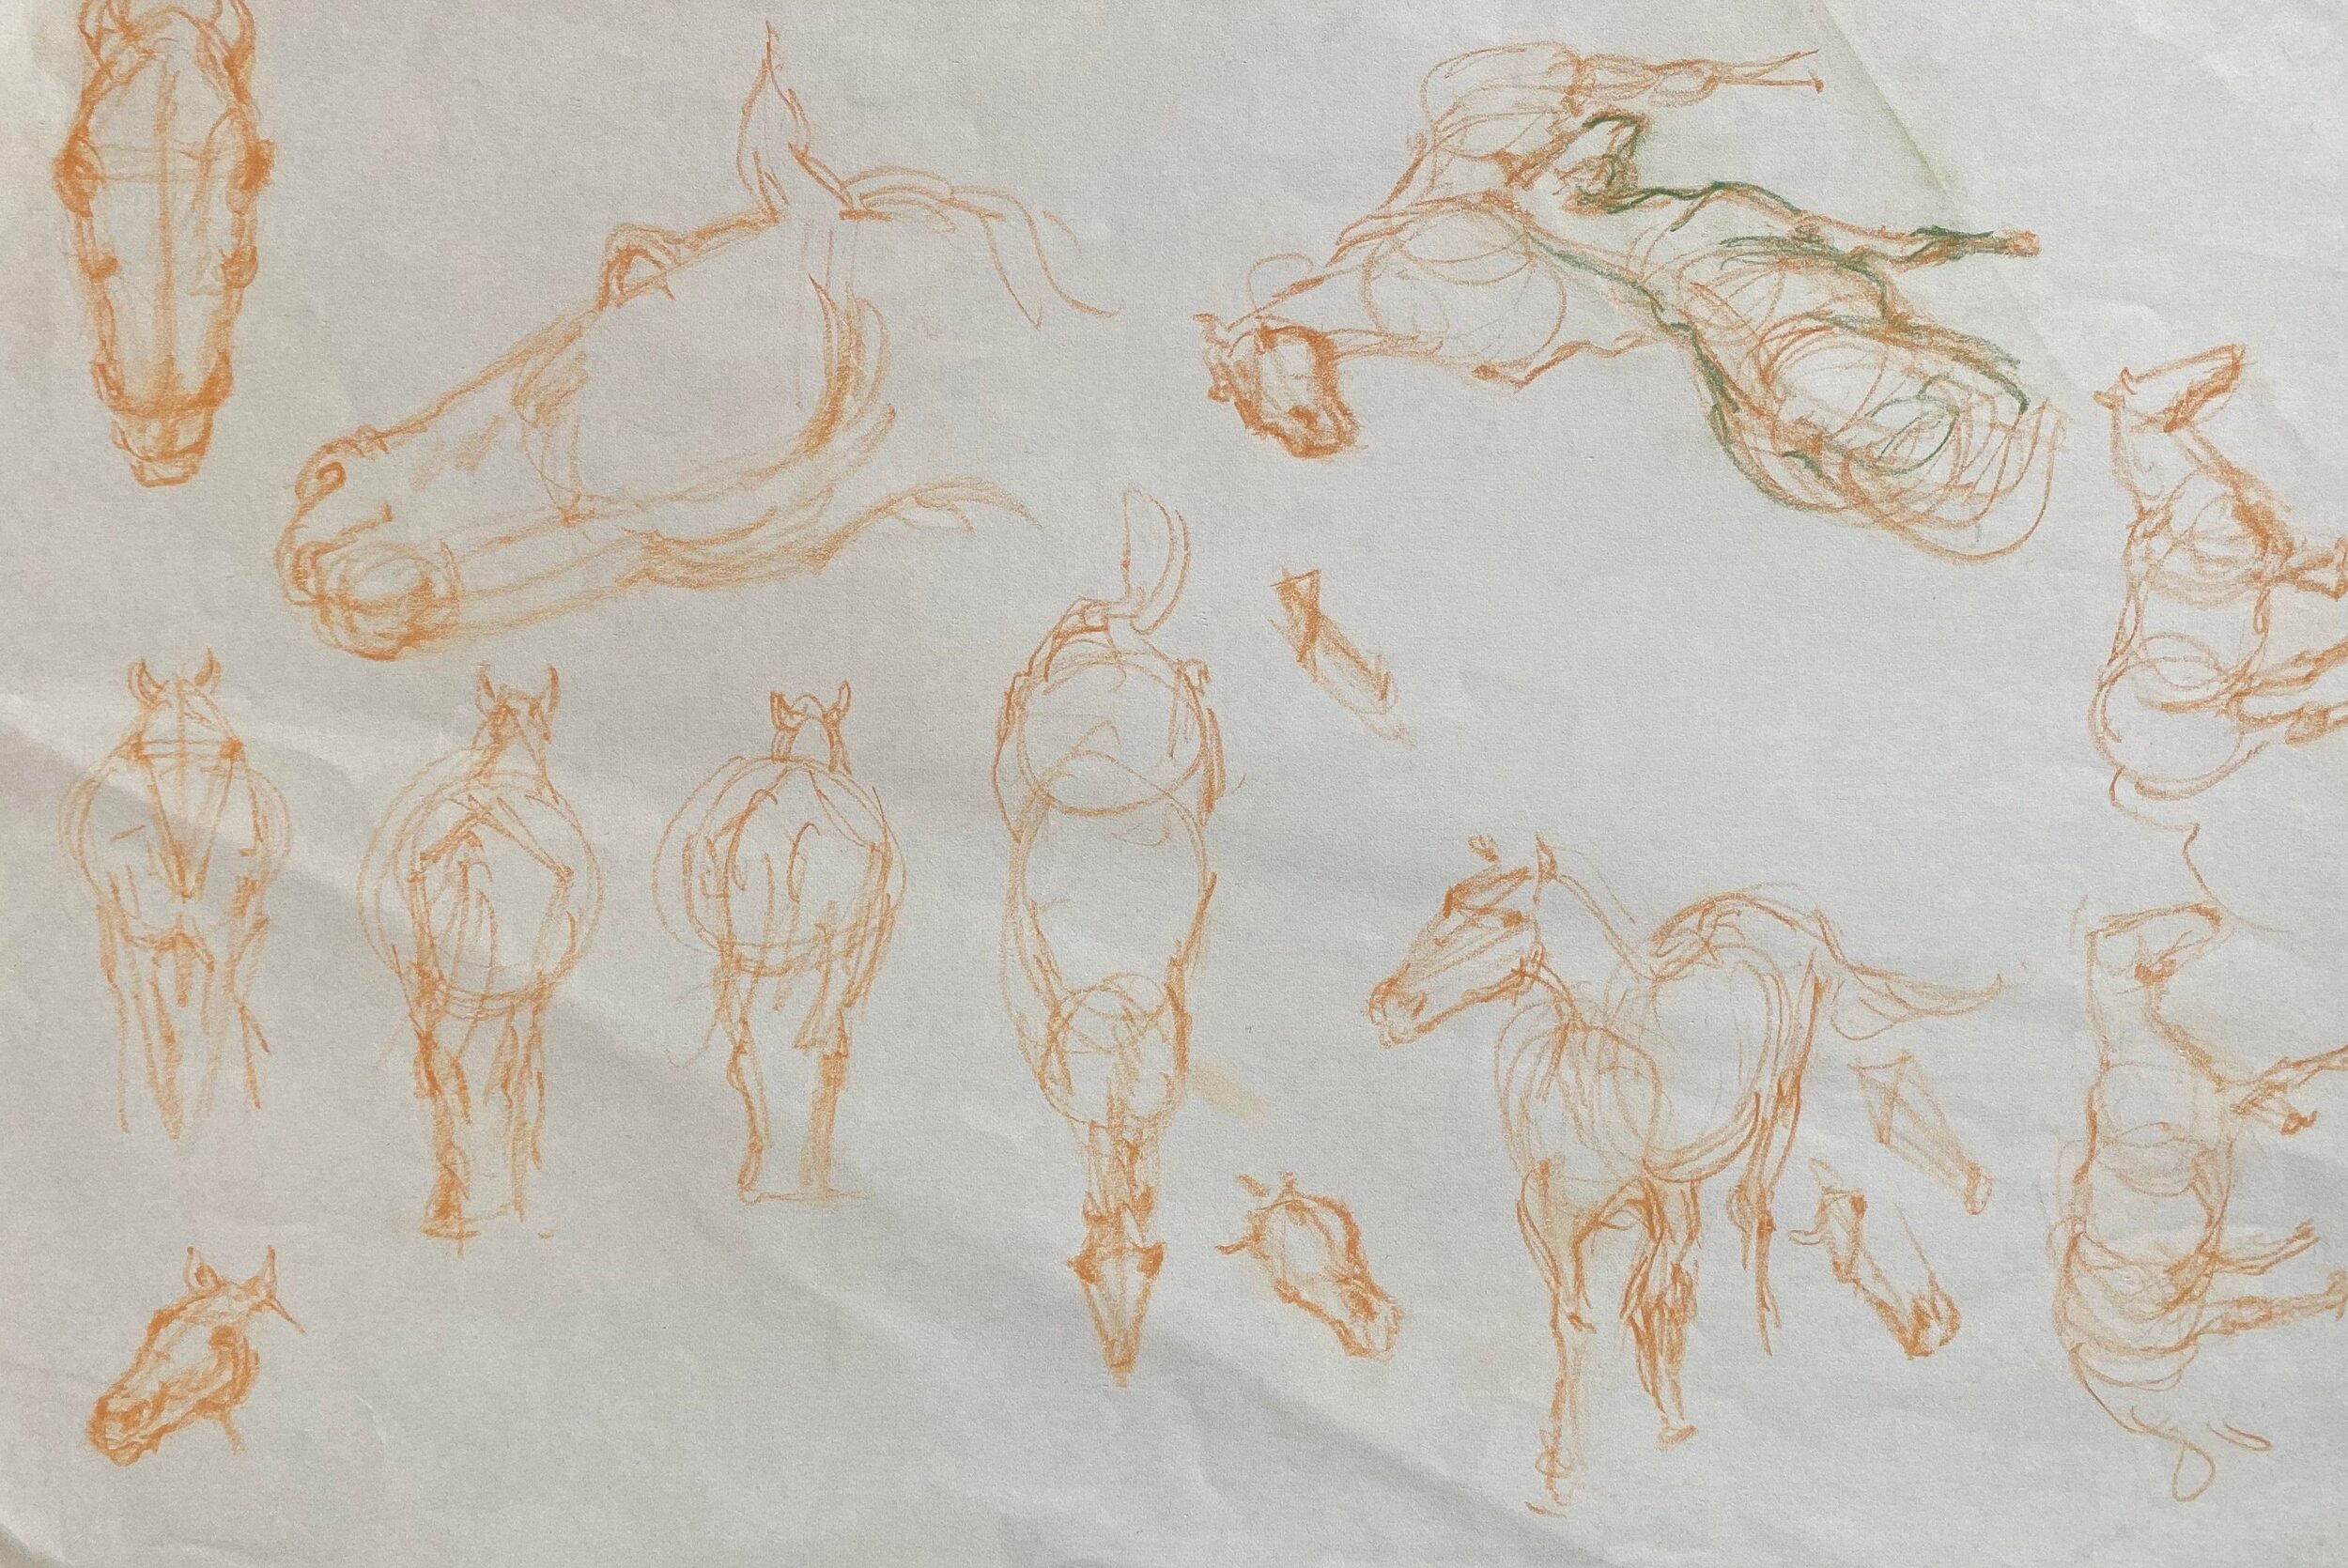   Description : Various sketch drawings of horses   Medium: Pastel and sepia pencil on paper   Dimensions:   H: 12 in W: 18 in 